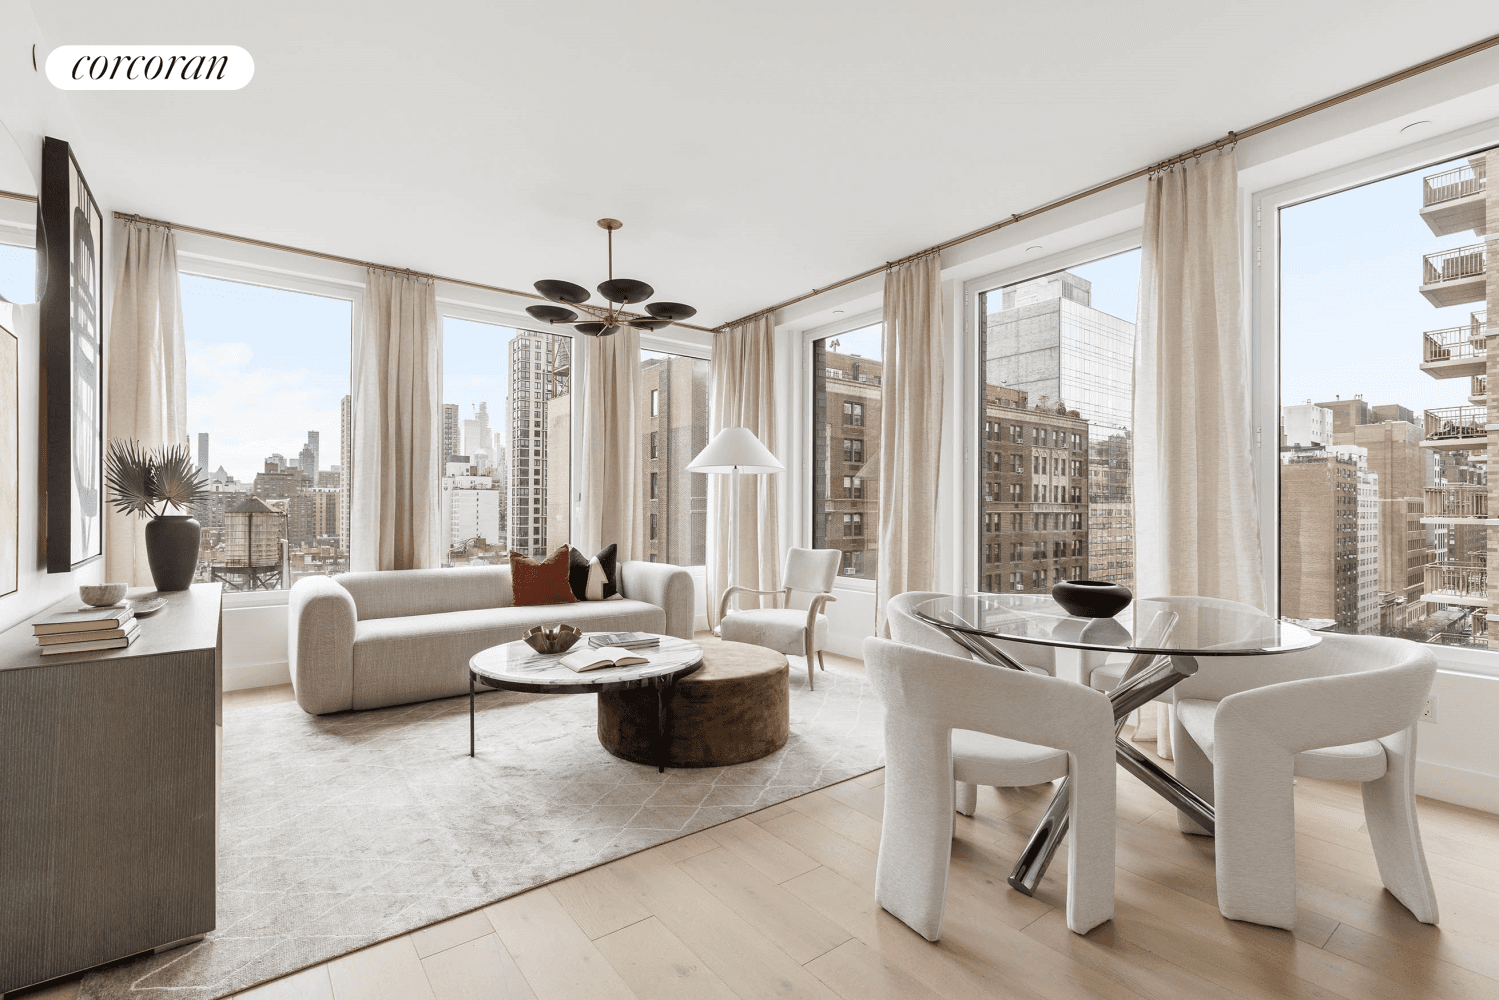 14th Floor at 323 East 79th StreetThree Bedrooms Two Baths Powder Room Private Outdoor Space 1, 910 sqft323 E 79th Street offers a blend of contemporary elegance and modern comfort ...